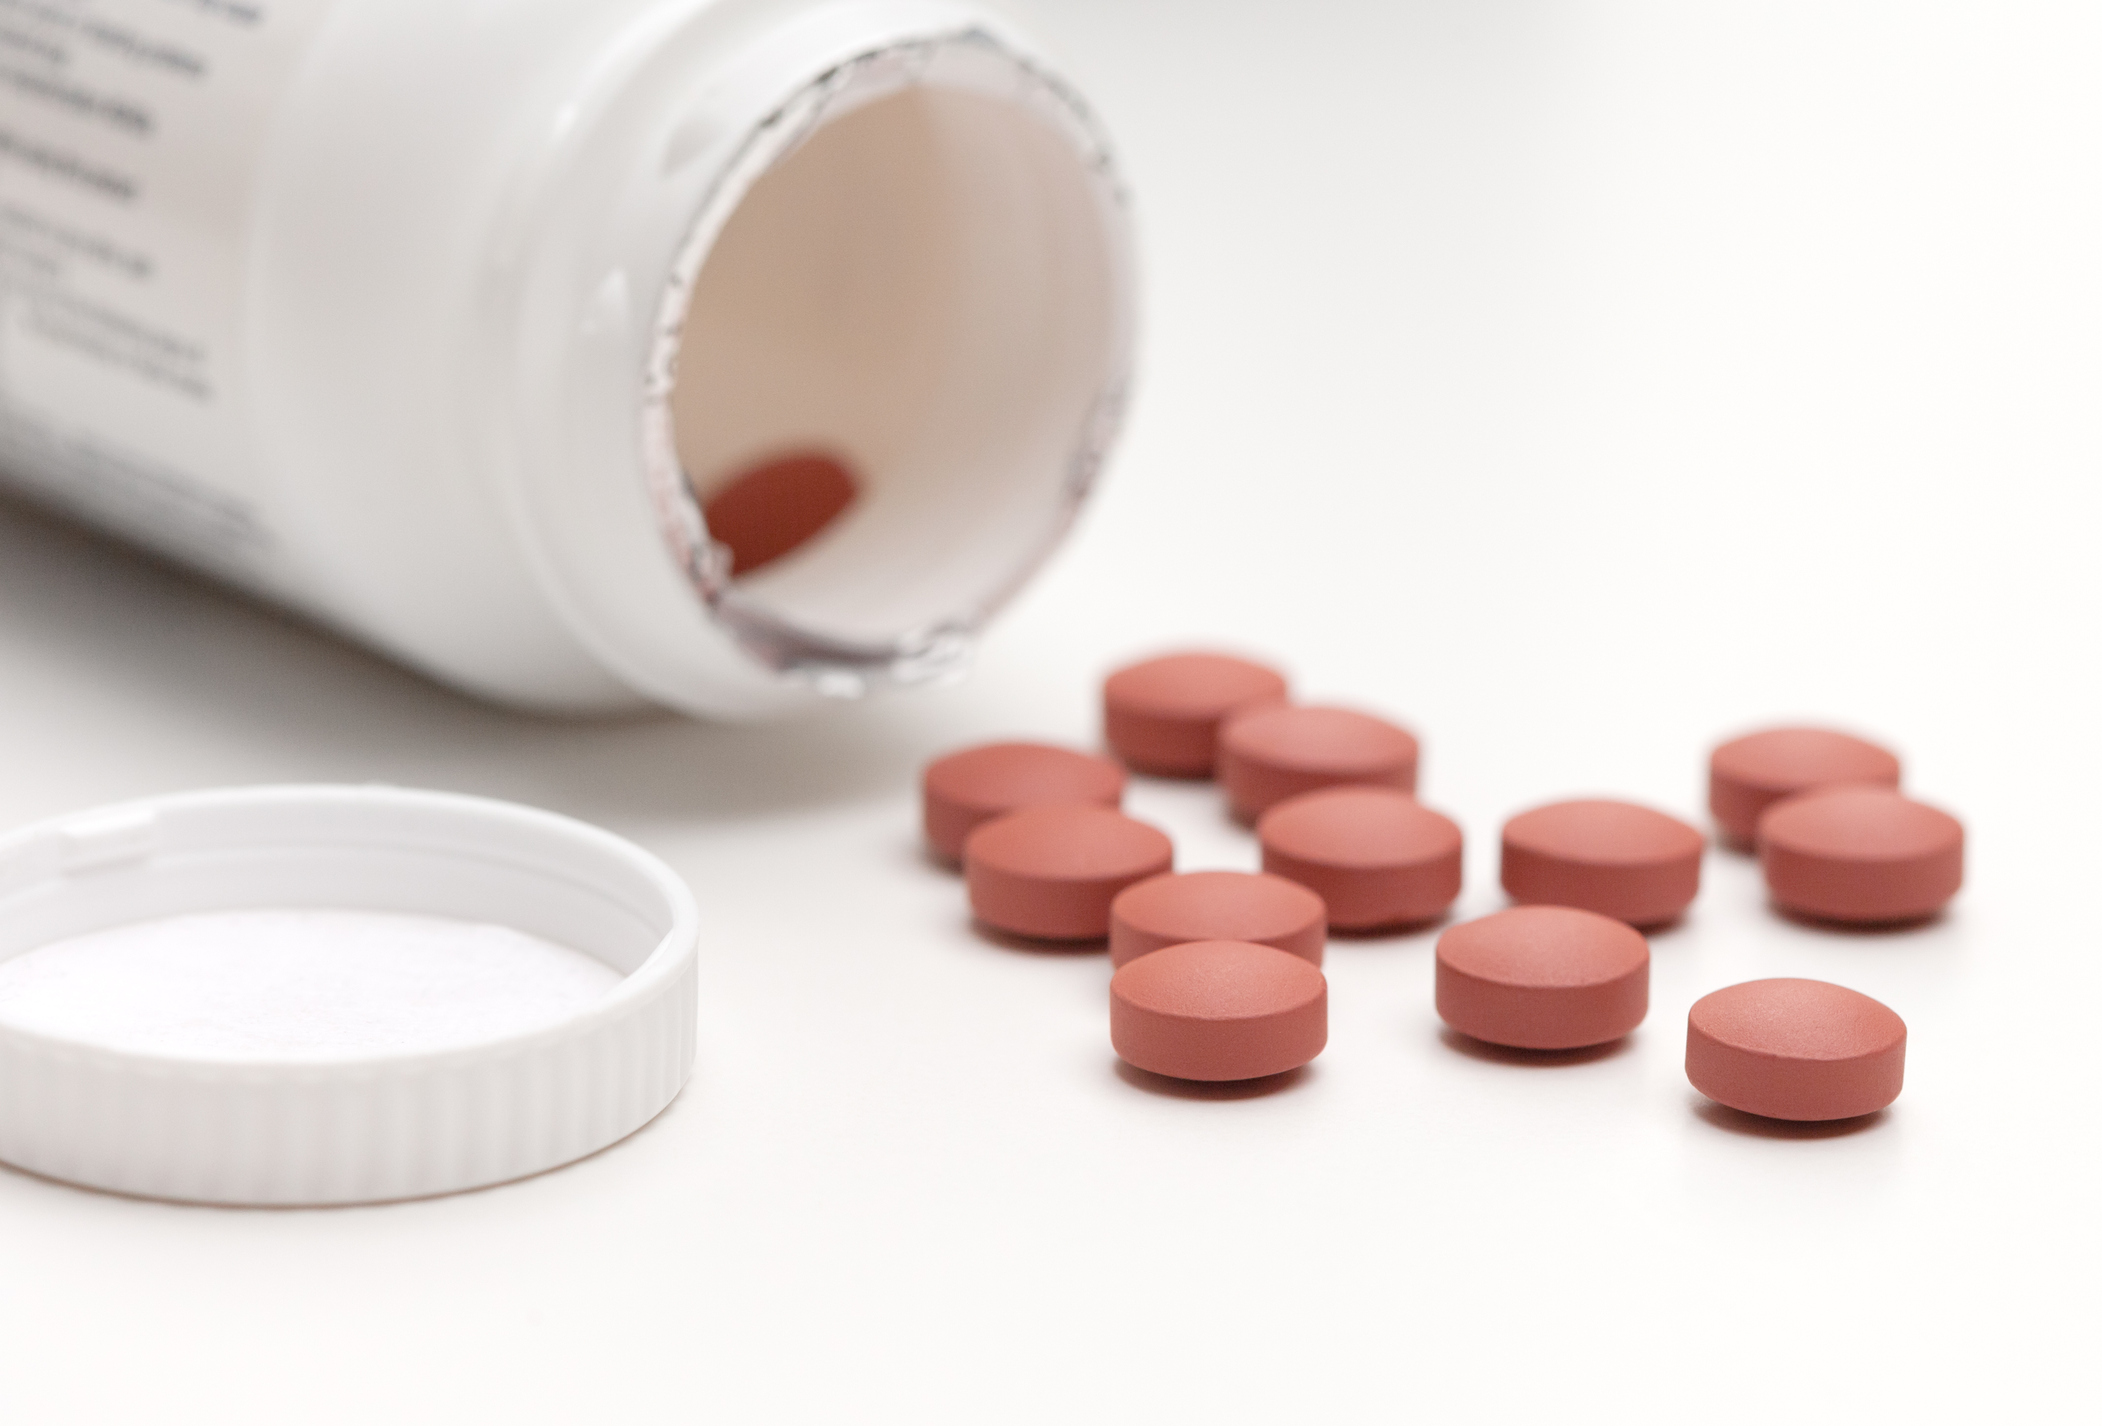 Ibuprofen does not worsen COVID-19, reports FactCheck.org | Penn Today